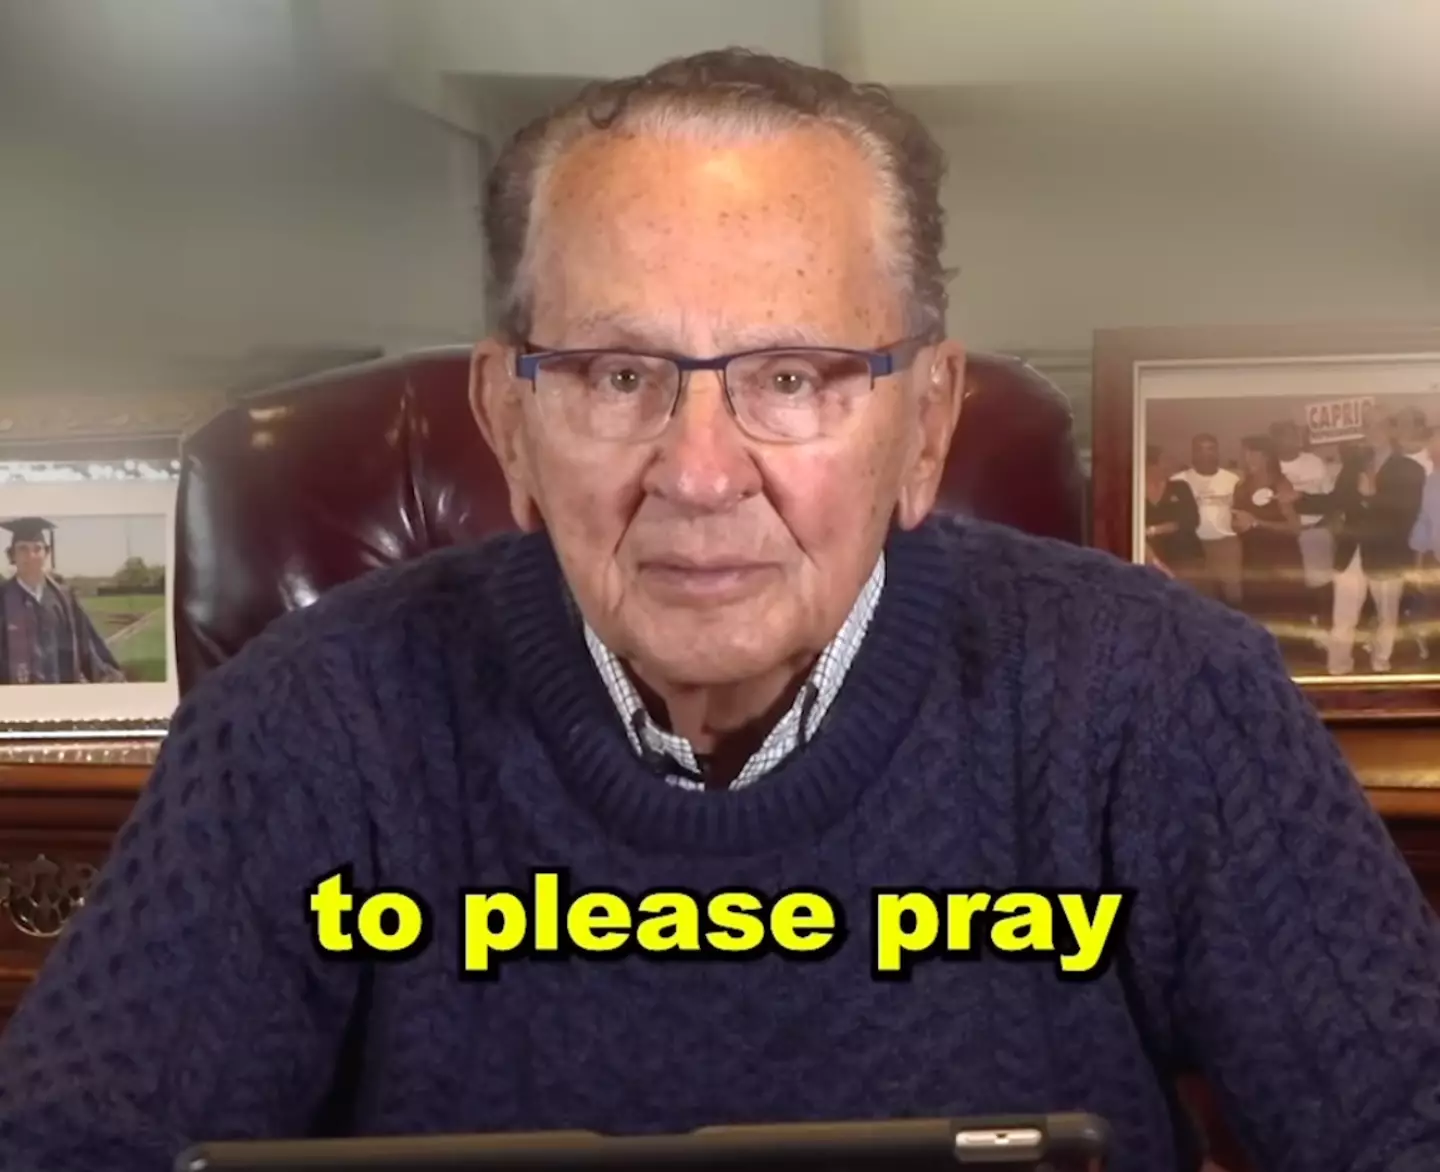 Judge Caprio has asked people to 'pray' for him.